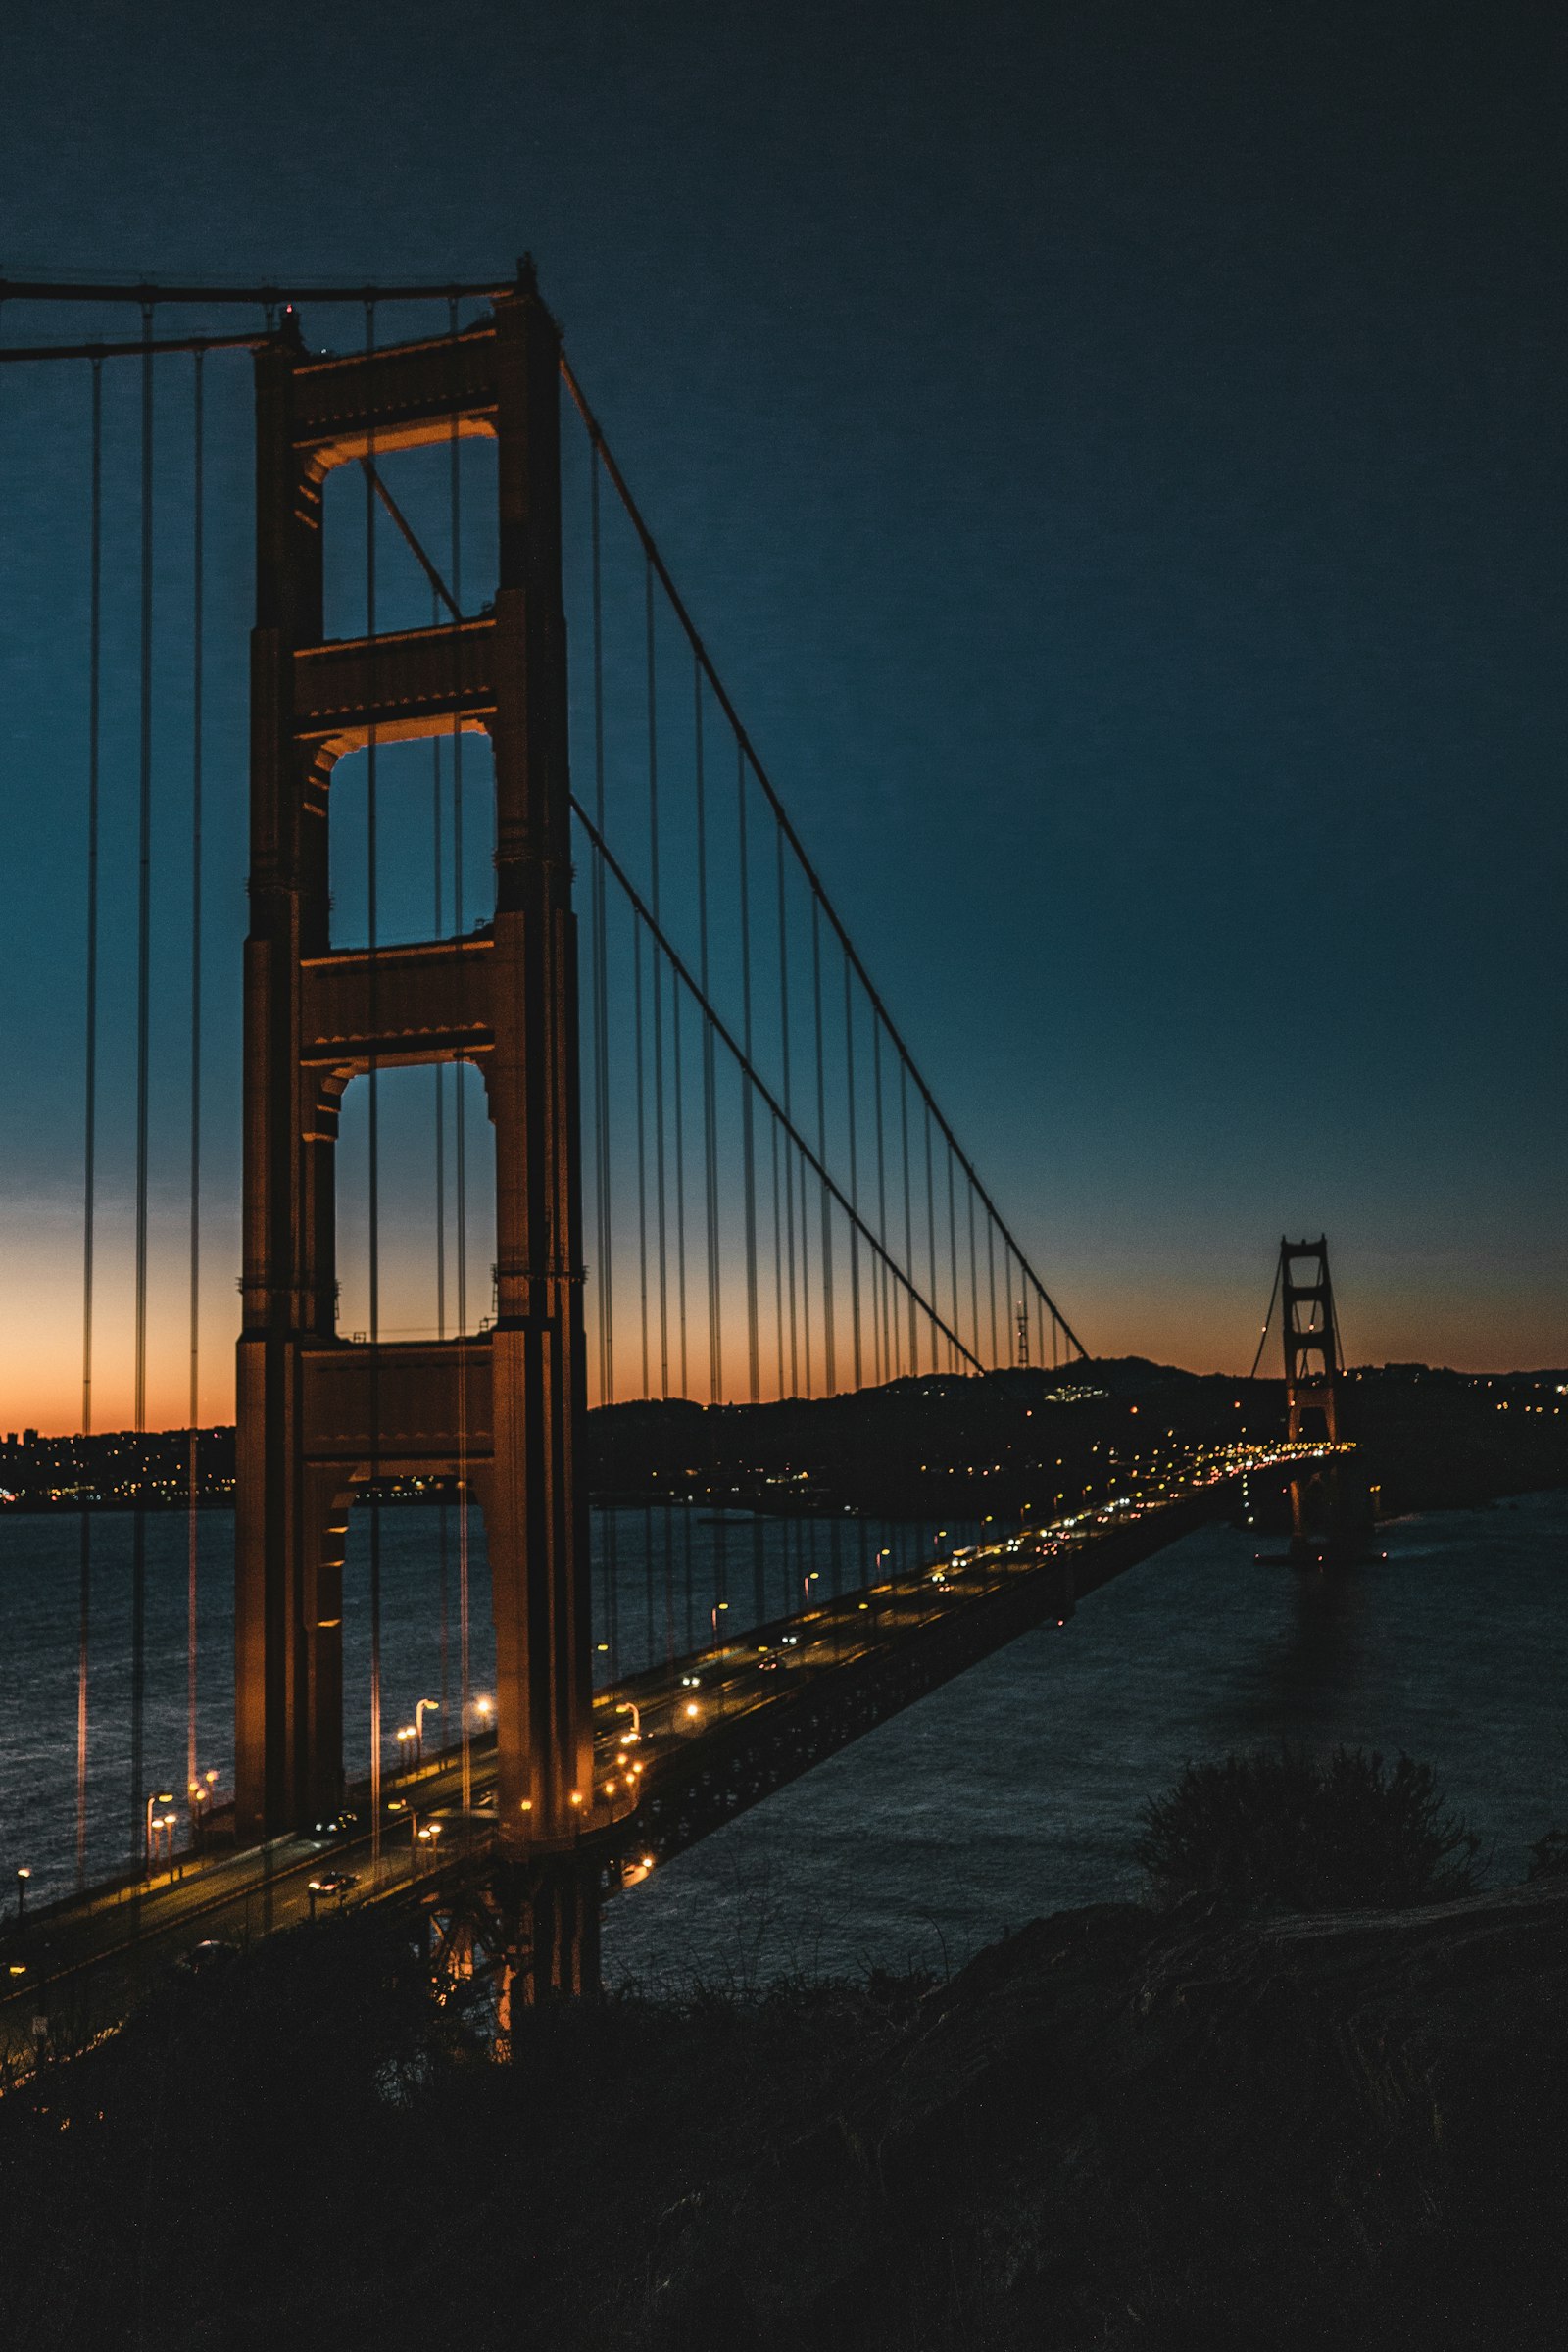 Sony a5100 sample photo. Golden gate at night photography